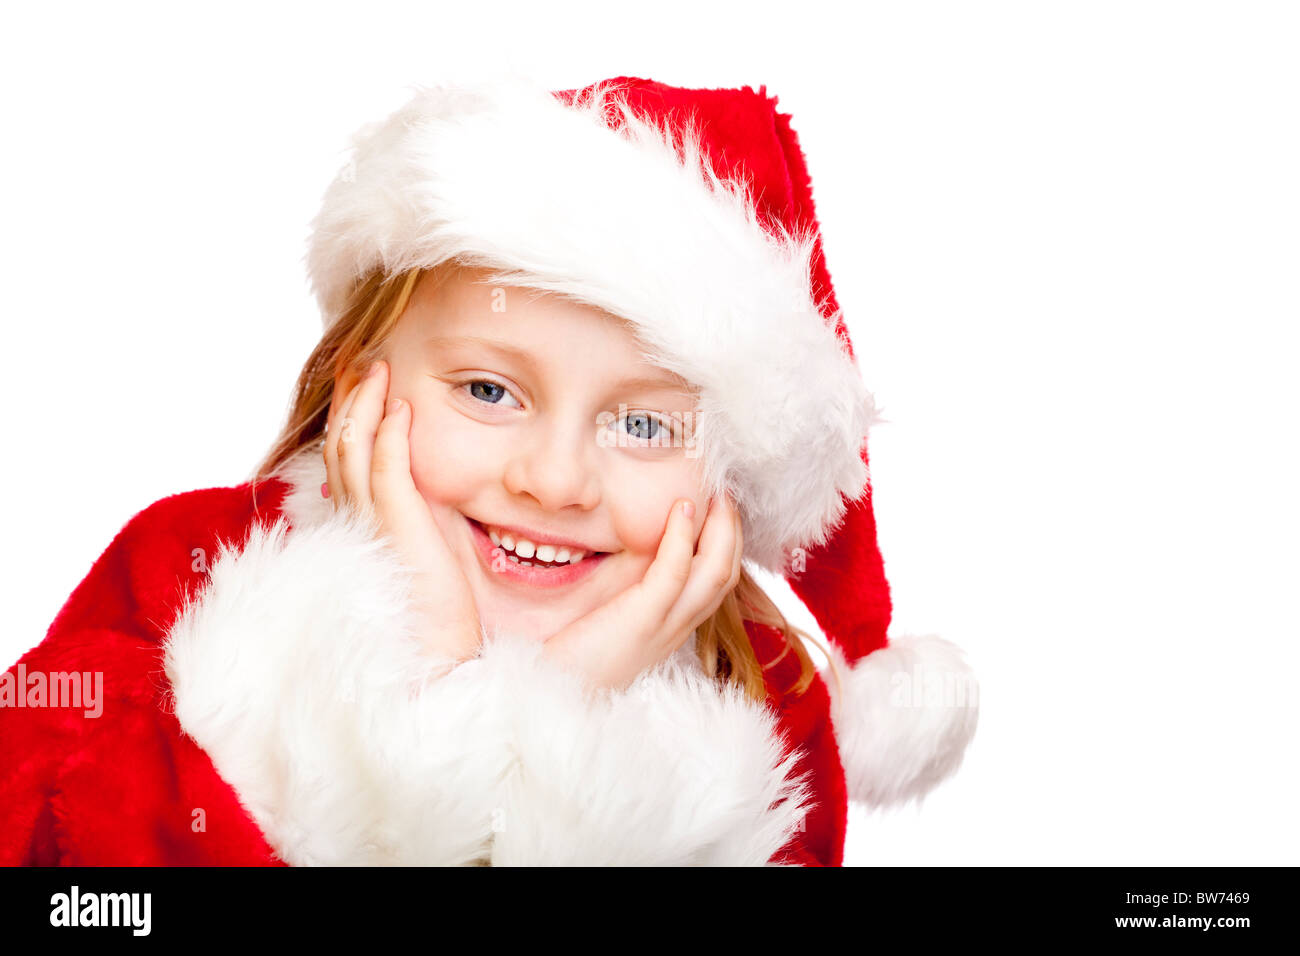 Small girl dressed as Santa Claus smiles happy.  Isolated on white background. Stock Photo